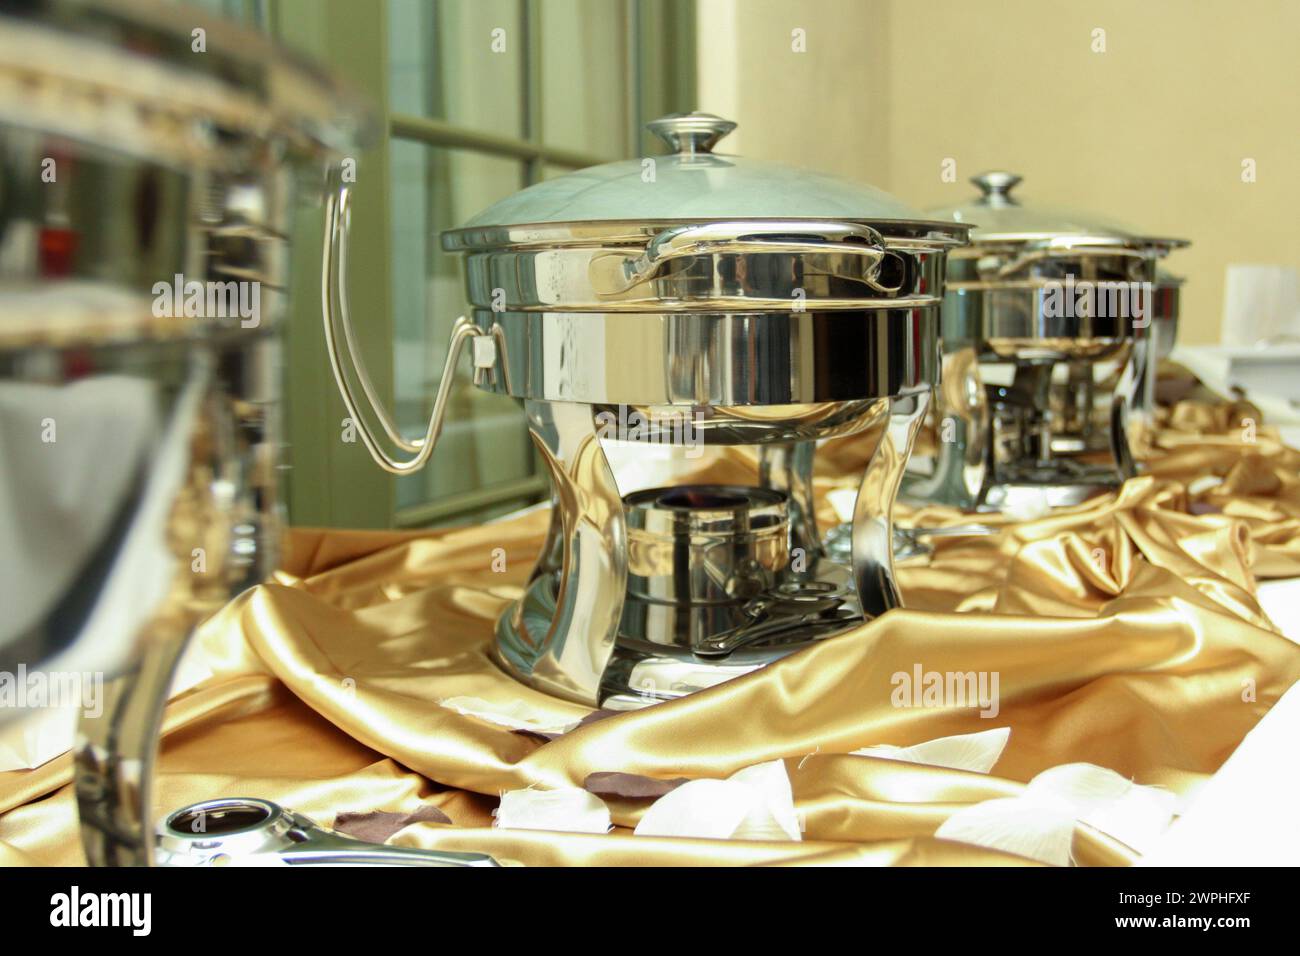 Set up of chafing Dishes for an event Stock Photo